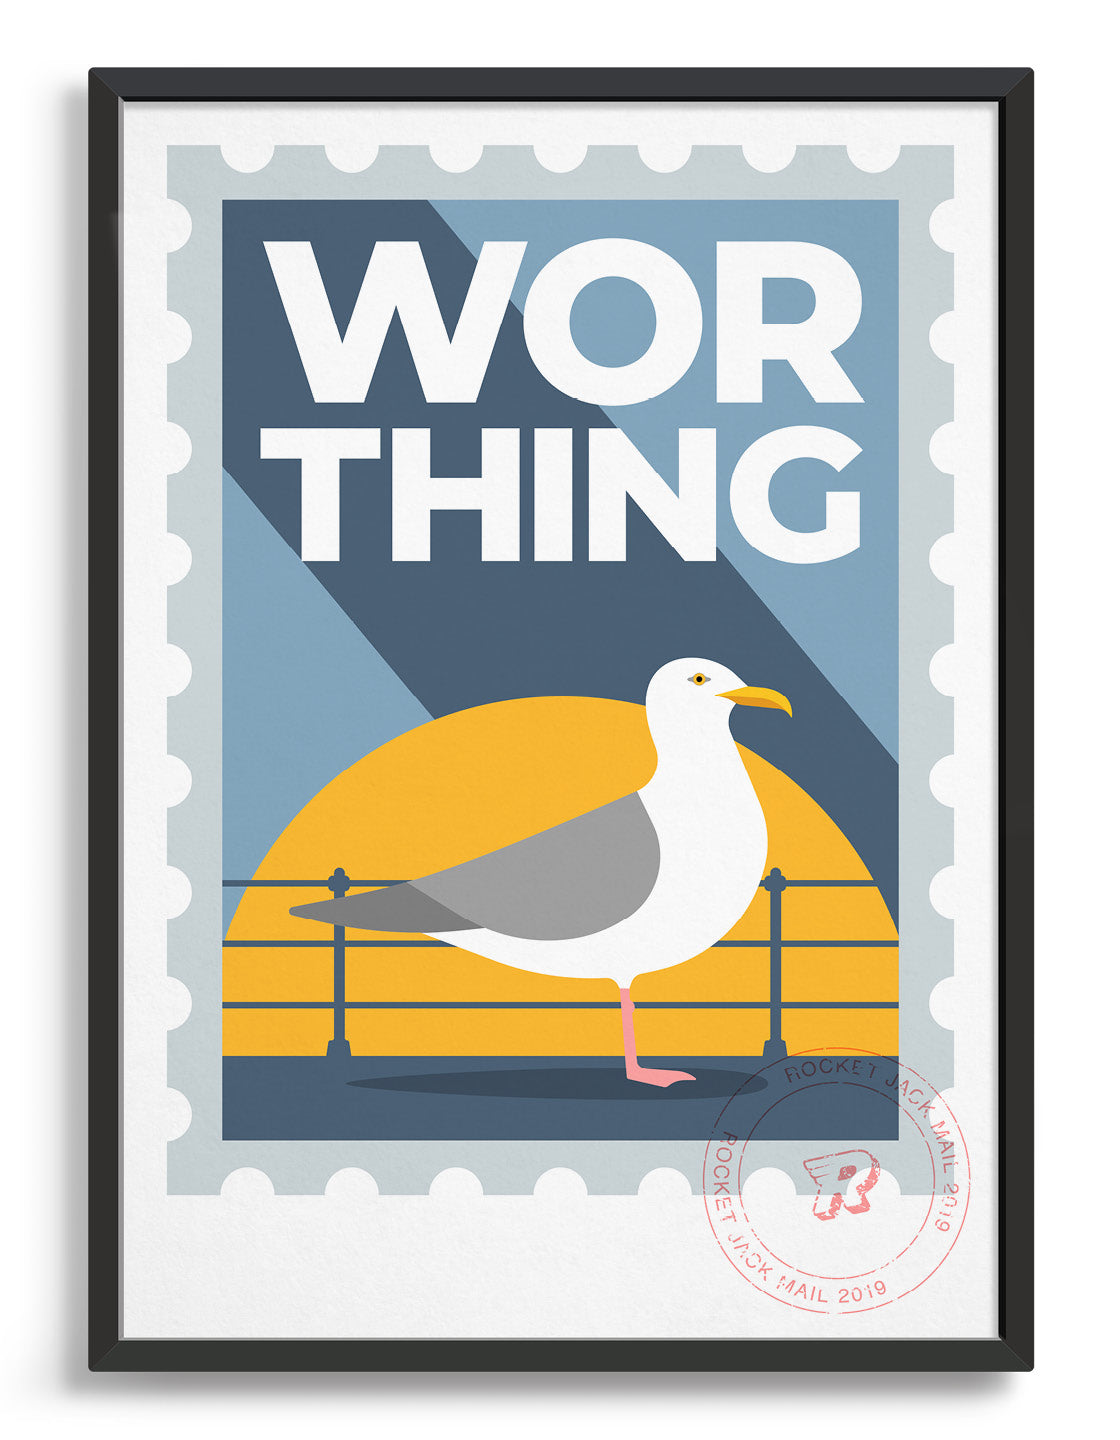 Worthing travel print in the style of a stamp. Features a seagull and promenade railing with bold Worthing text on a grey and yellow background